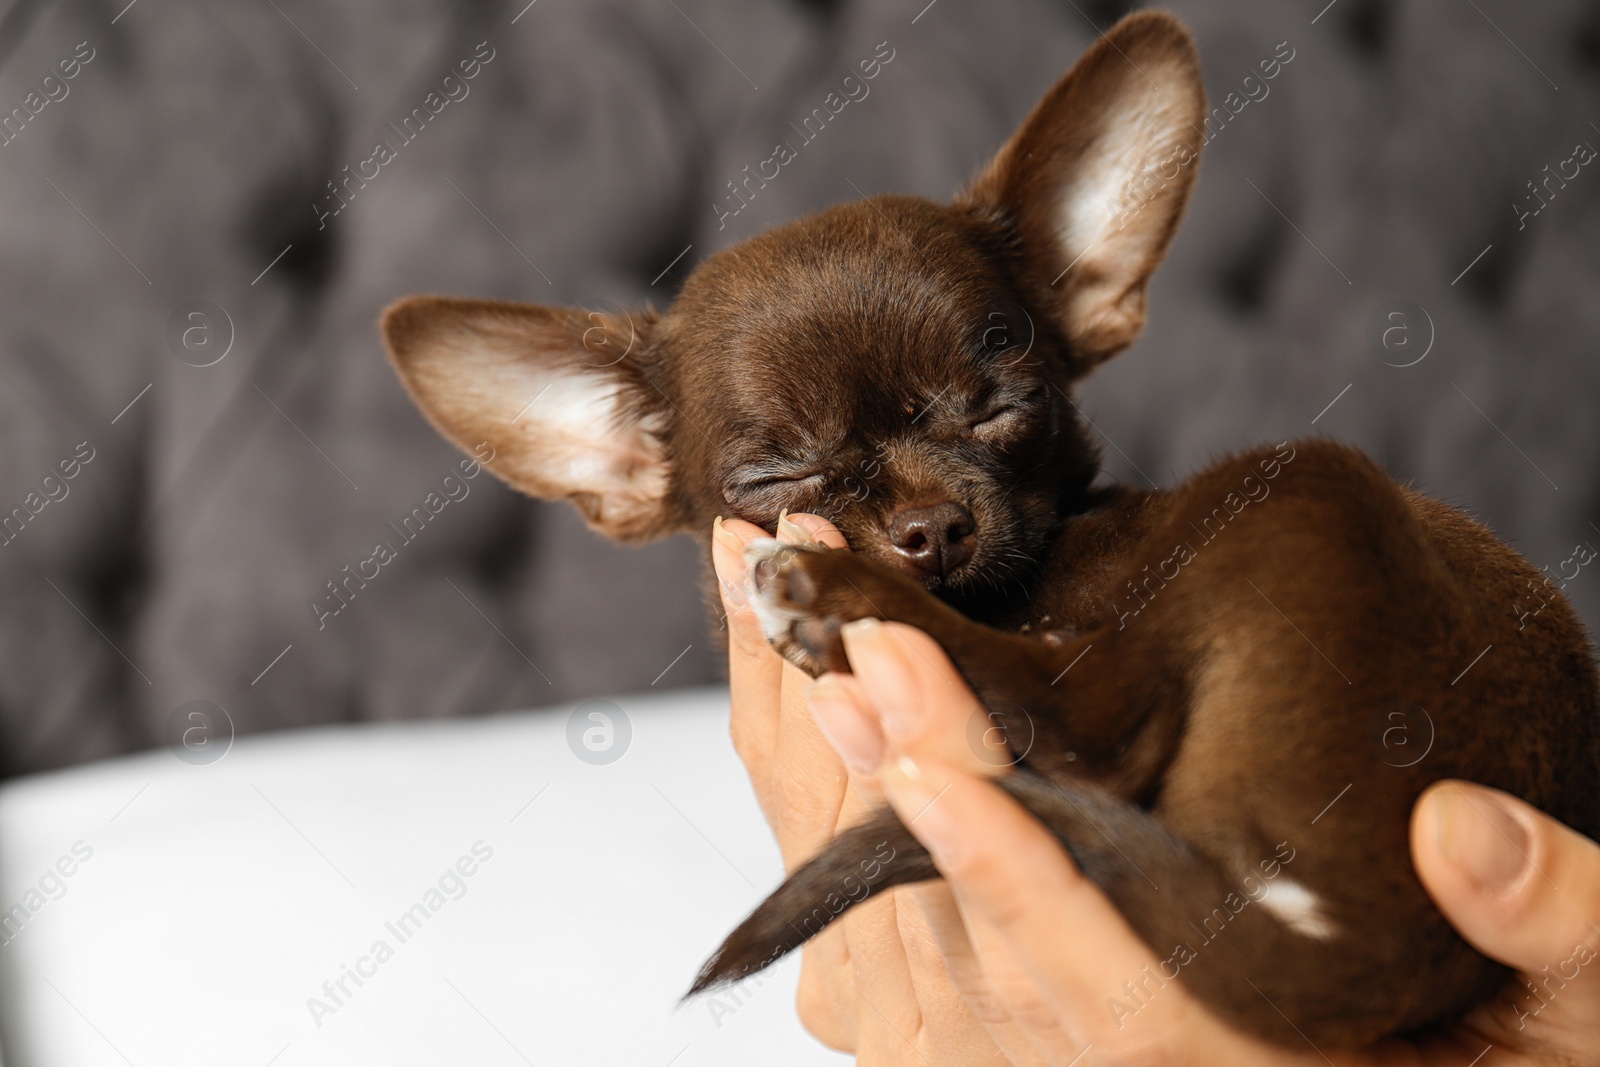 Photo of Woman holding sleeping cute small Chihuahua dog against blurred background, closeup